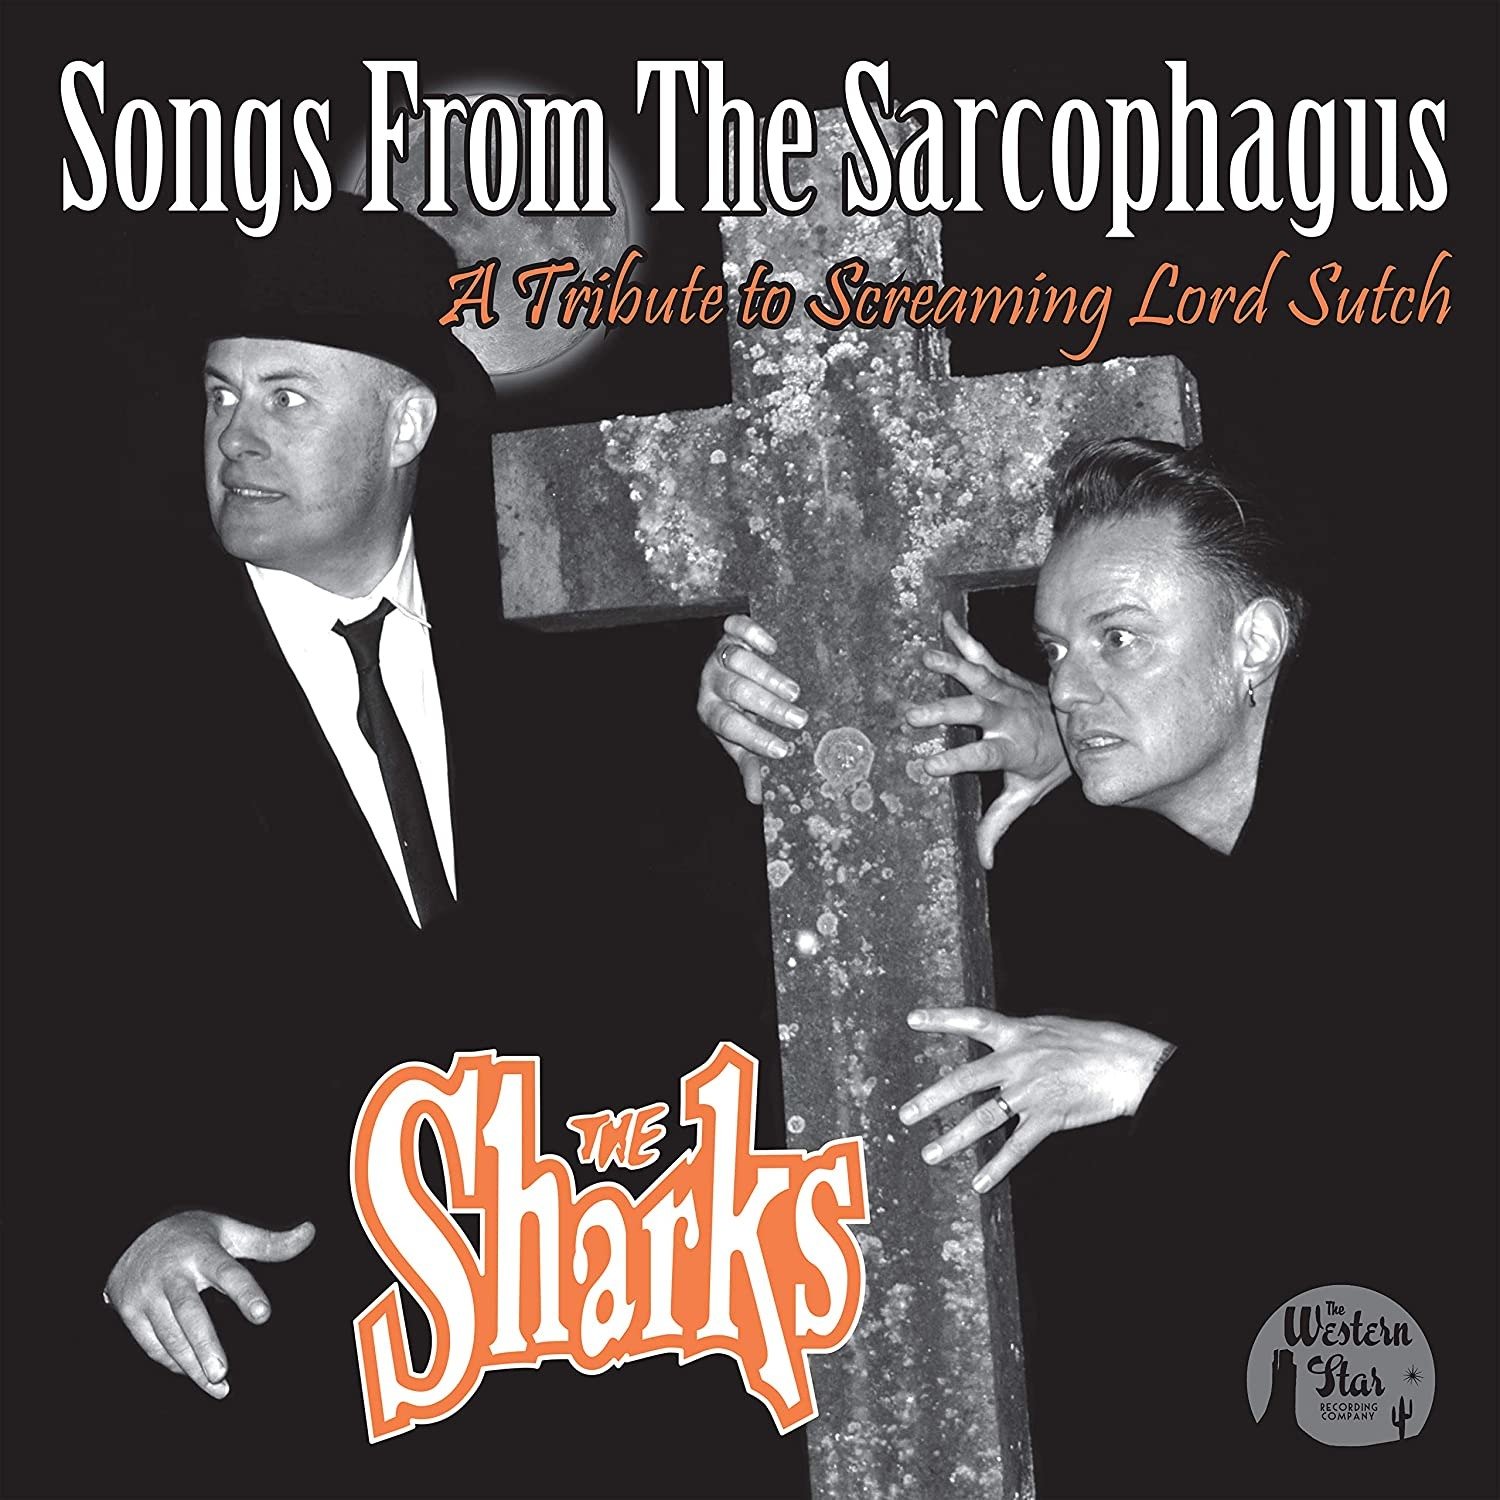 CD Shop - SHARKS SONGS FROM THE SARCOPHAGUS